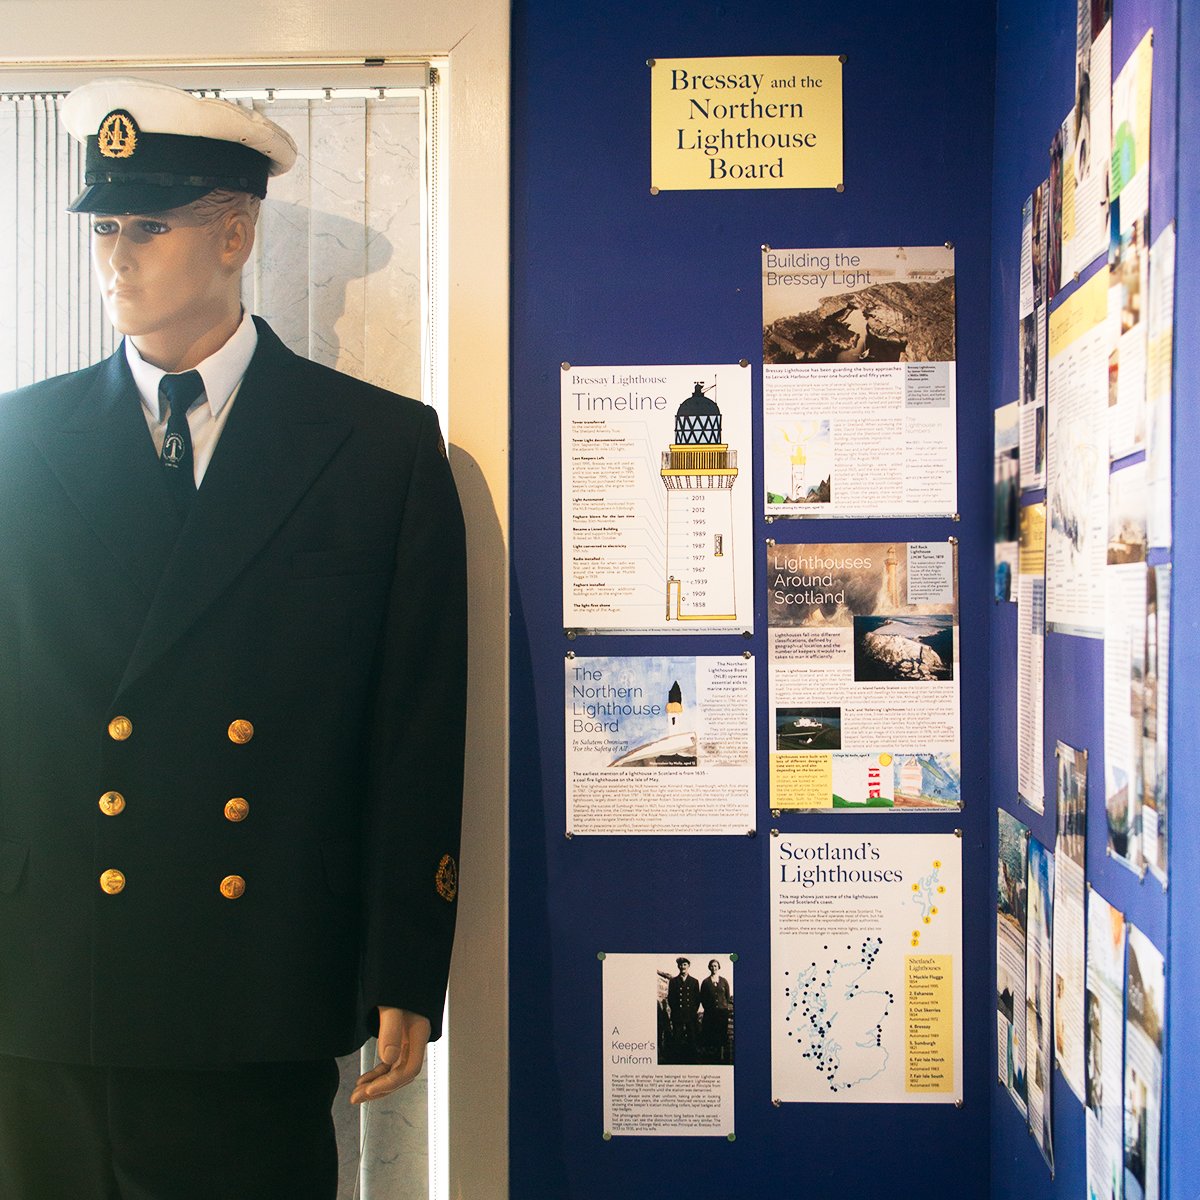  An overview of the display. Thank you to Bressay Heritage Centre for also exhibiting this former keeper’s uniform.  